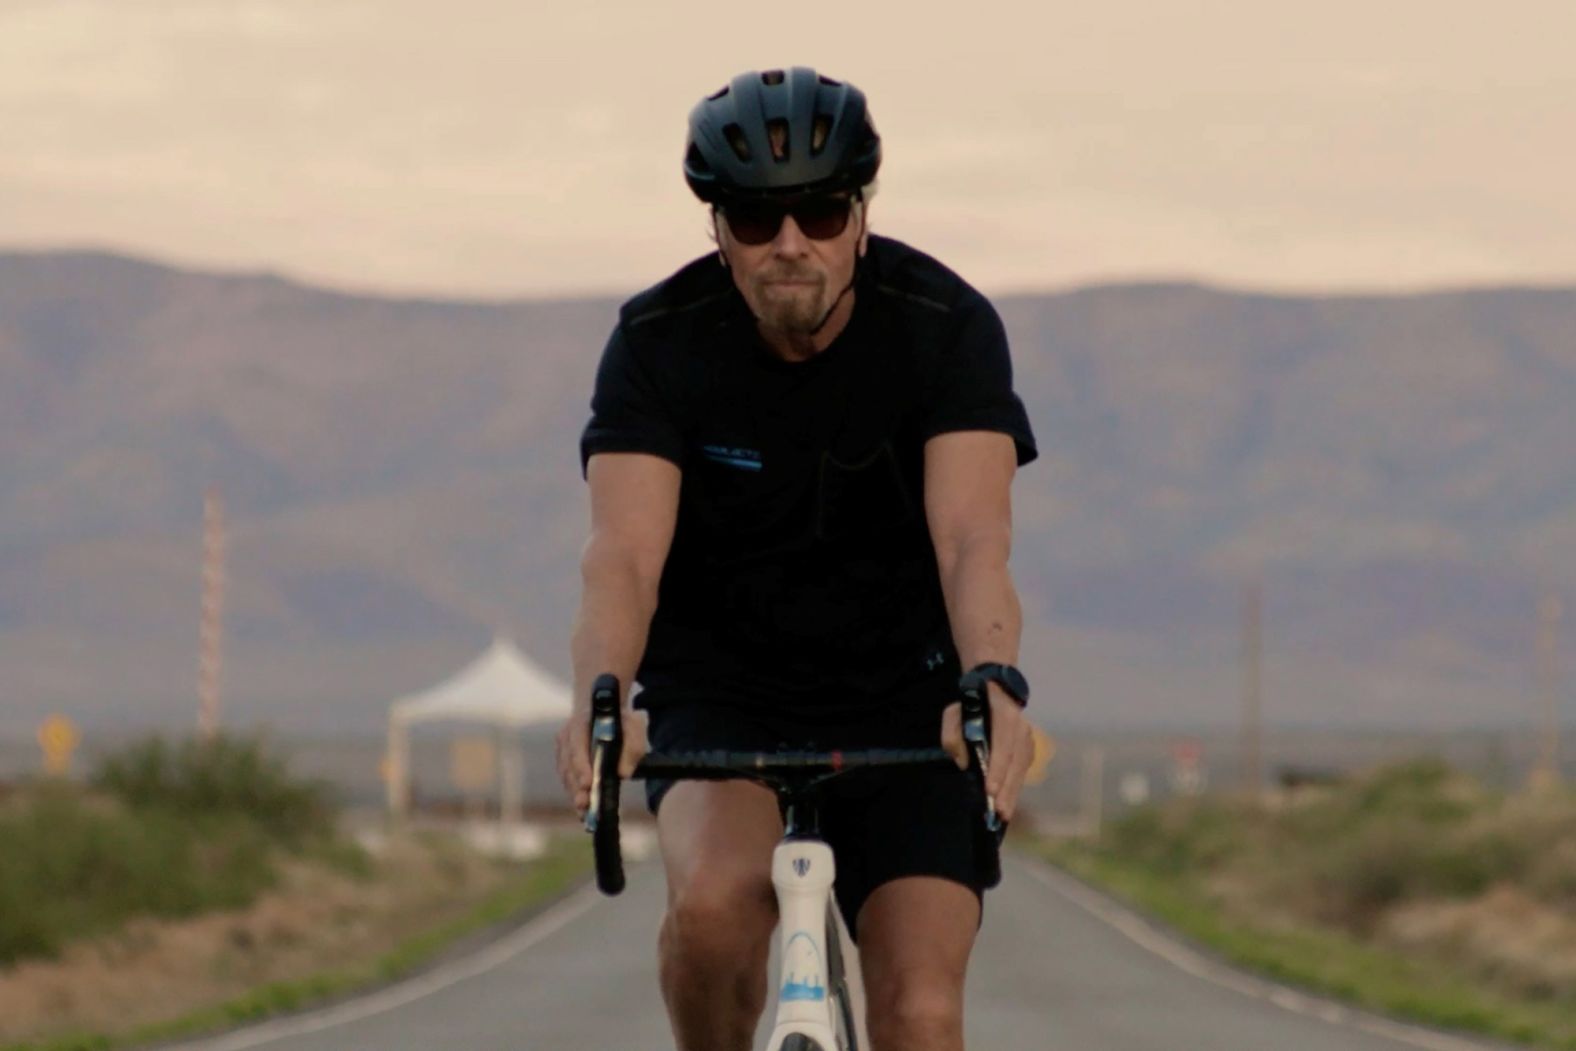 Branson arrives at Spaceport America by bicycle just after sunrise.